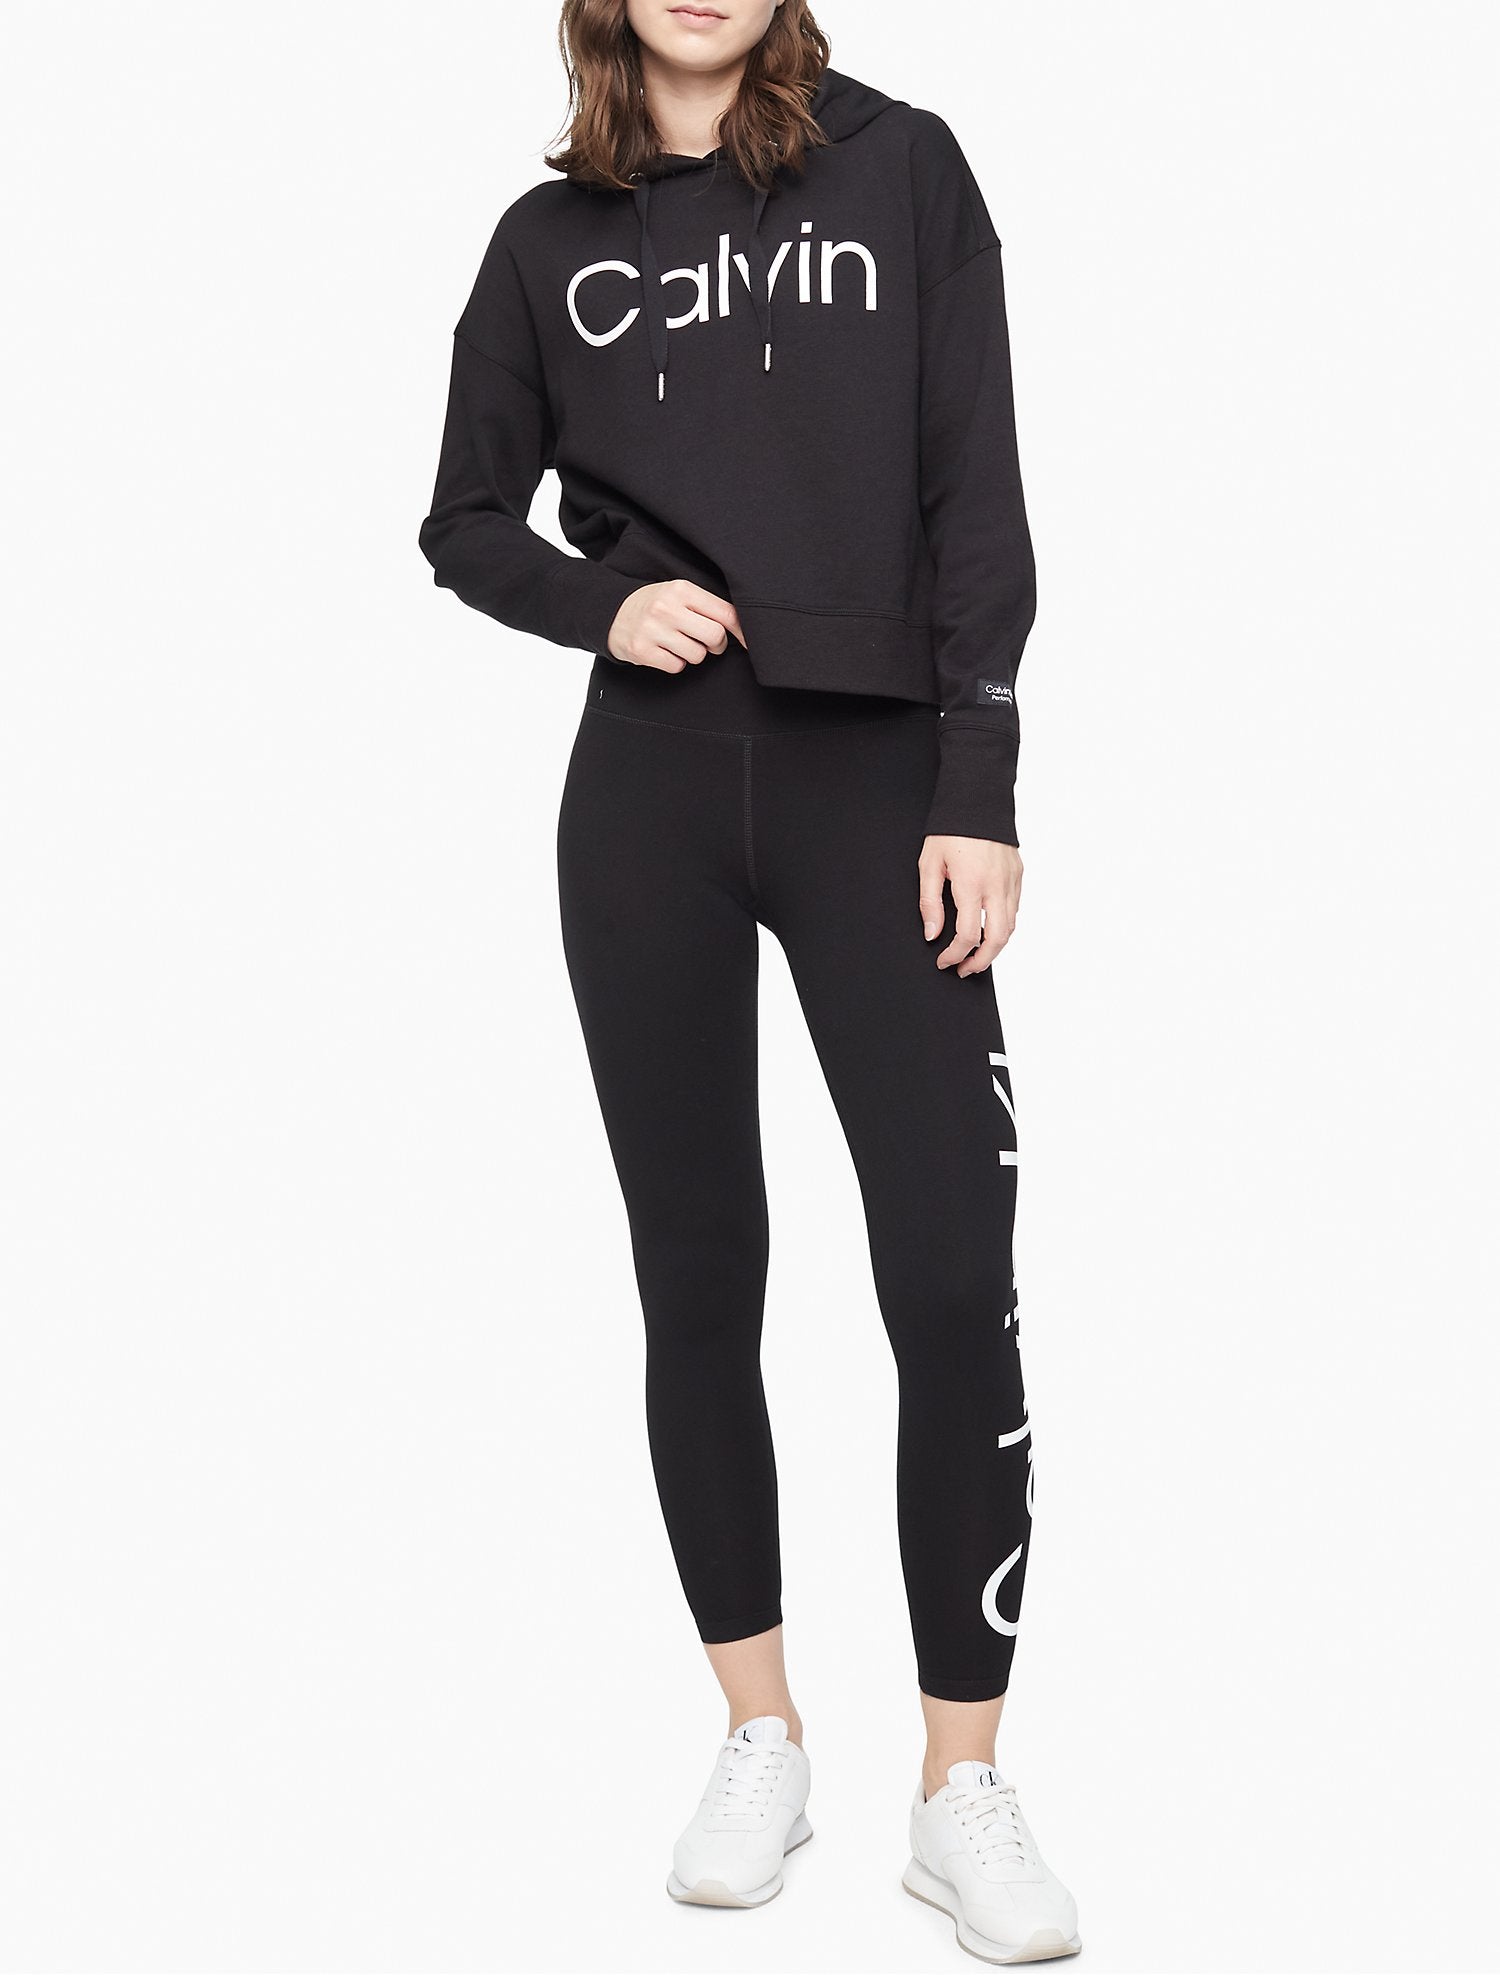 Calvin Klein Canada Sale: 20% OFF Activewear & Loungewear Using Promo Code  + 50% OFF Sale items - Canadian Freebies, Coupons, Deals, Bargains, Flyers,  Contests Canada Canadian Freebies, Coupons, Deals, Bargains, Flyers,  Contests Canada